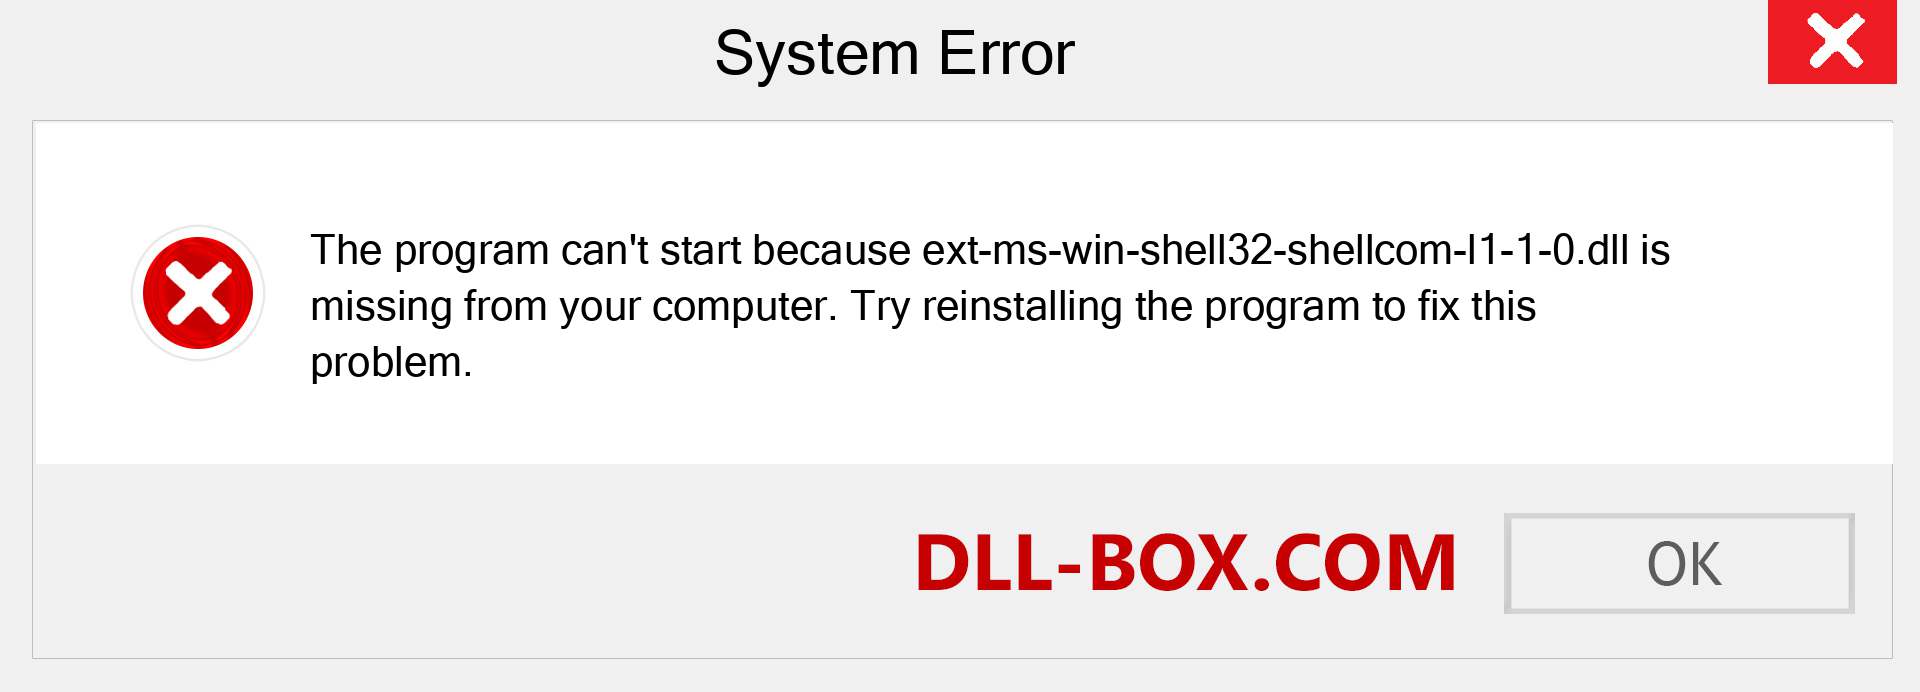  ext-ms-win-shell32-shellcom-l1-1-0.dll file is missing?. Download for Windows 7, 8, 10 - Fix  ext-ms-win-shell32-shellcom-l1-1-0 dll Missing Error on Windows, photos, images